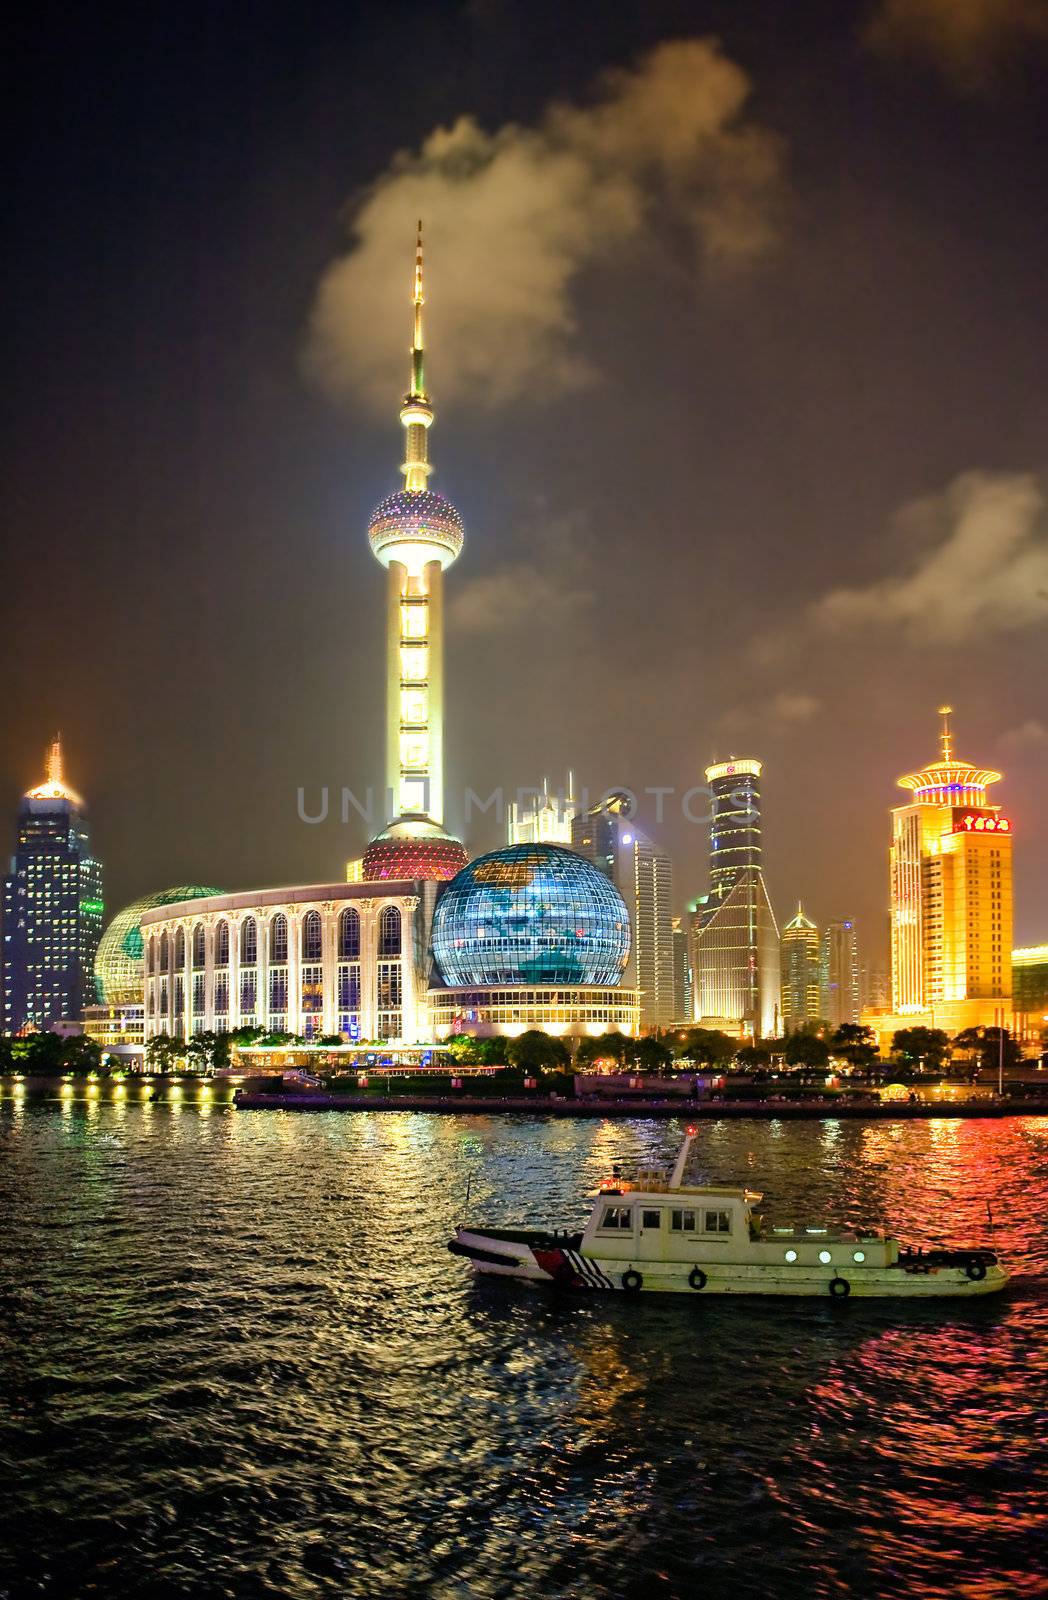 View of Shanghai Pudong Skyline at night